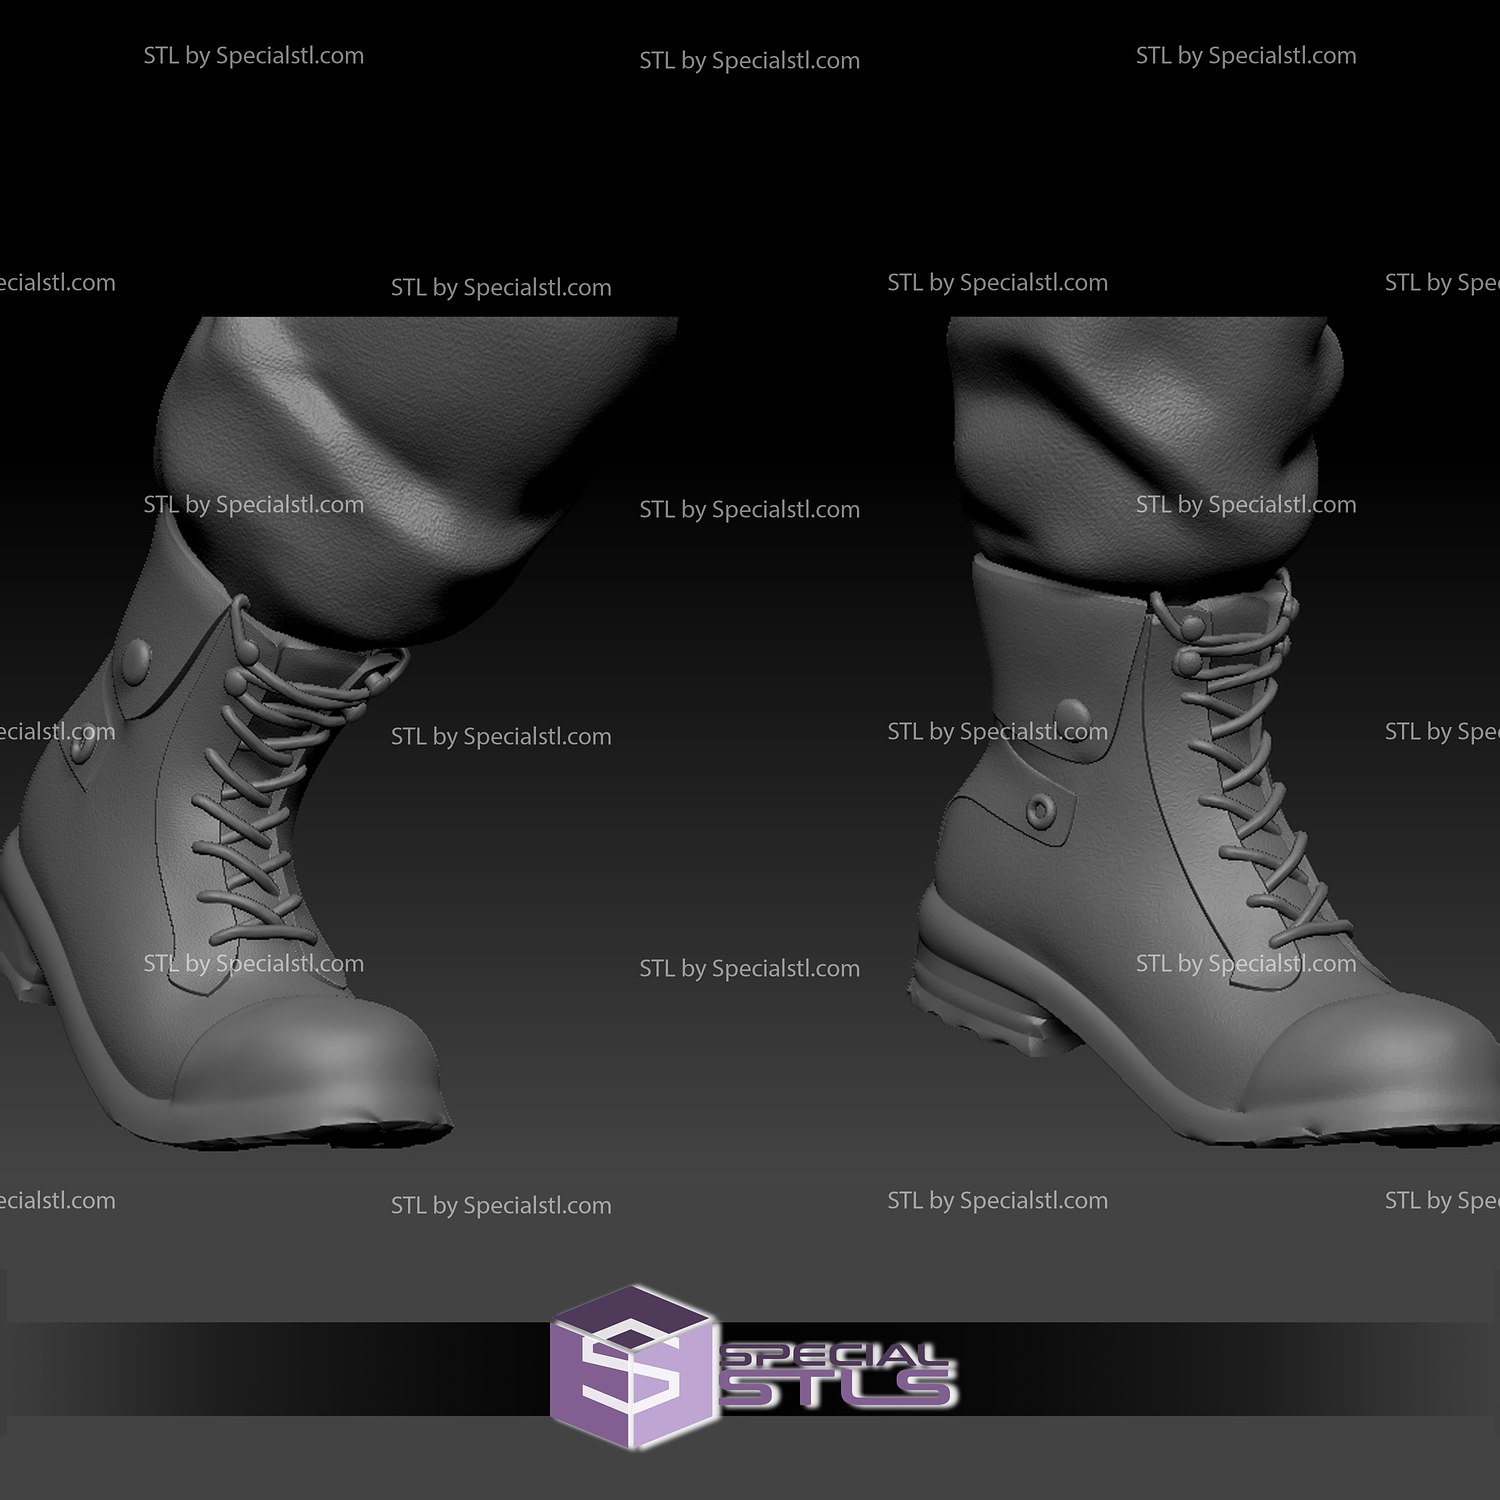 guile street fighter 3D Models to Print - yeggi